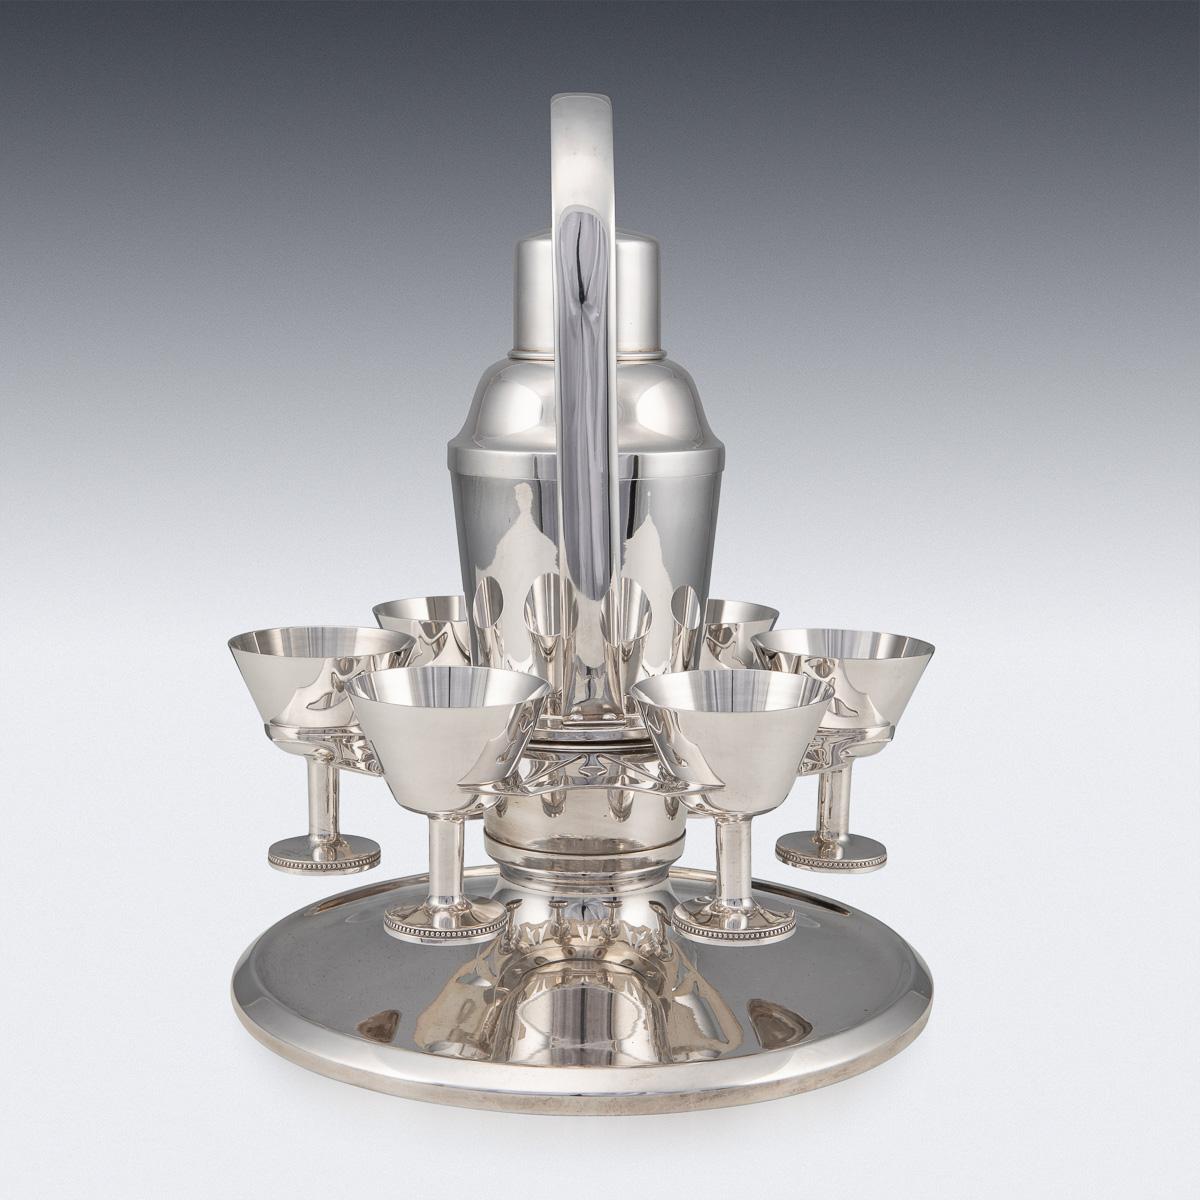 Superb 20th century Swedish silver plated cocktail shaker with six glasses on a stand with silver gilt interior. This cocktail shaker is in fabulous condition and is a must for any collector or just as a stand alone item, as useful today as it was